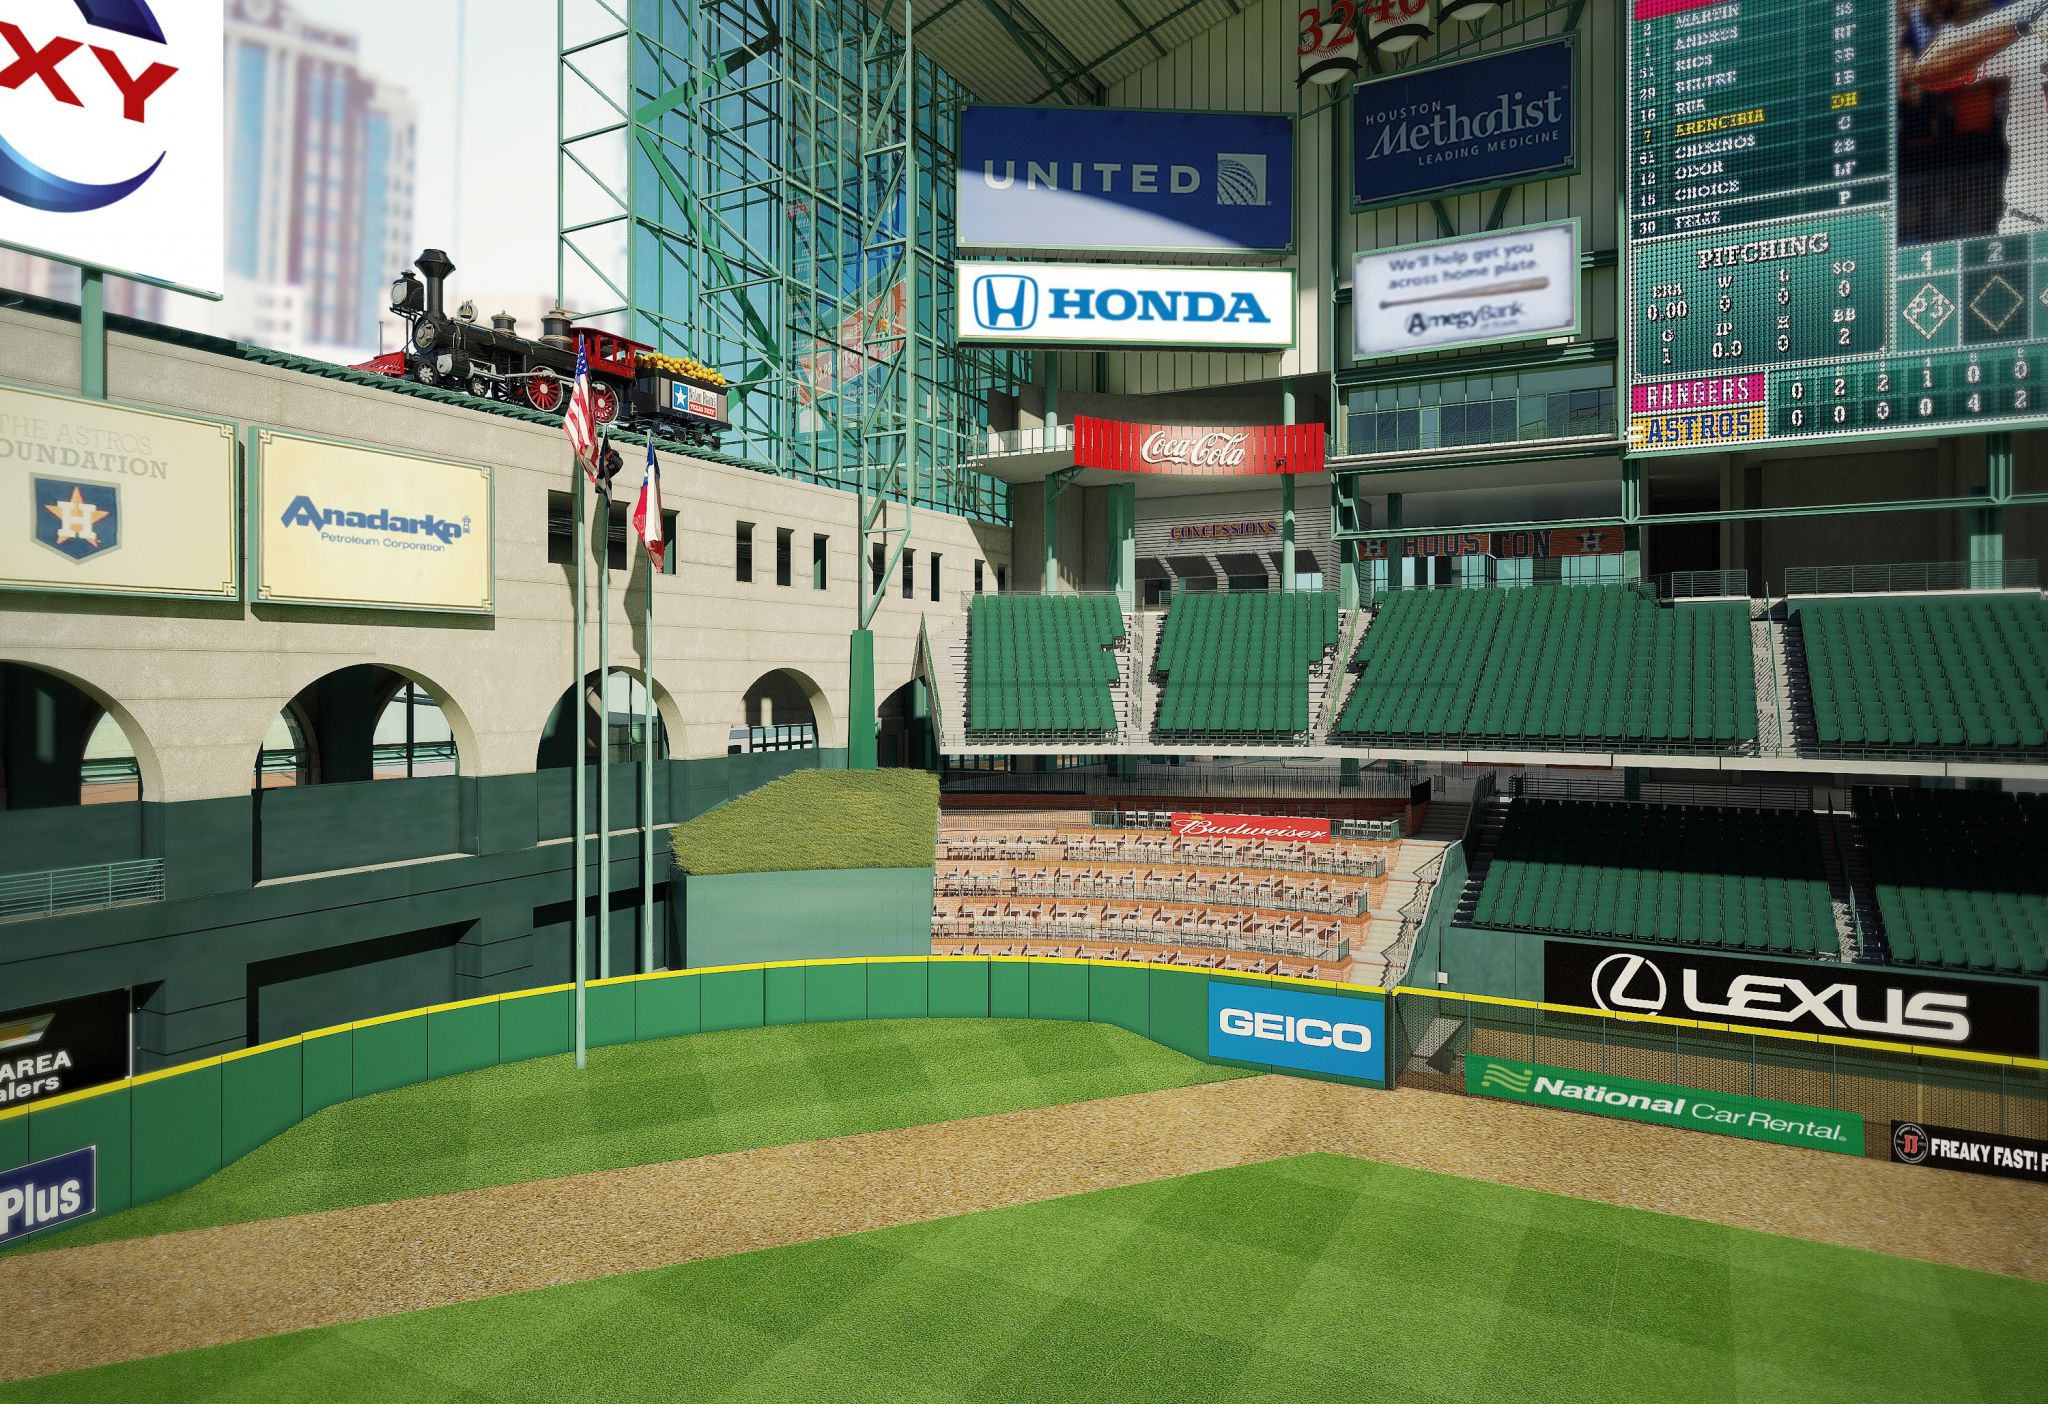 Step Inside: Minute Maid Park - Home of the Houston Astros